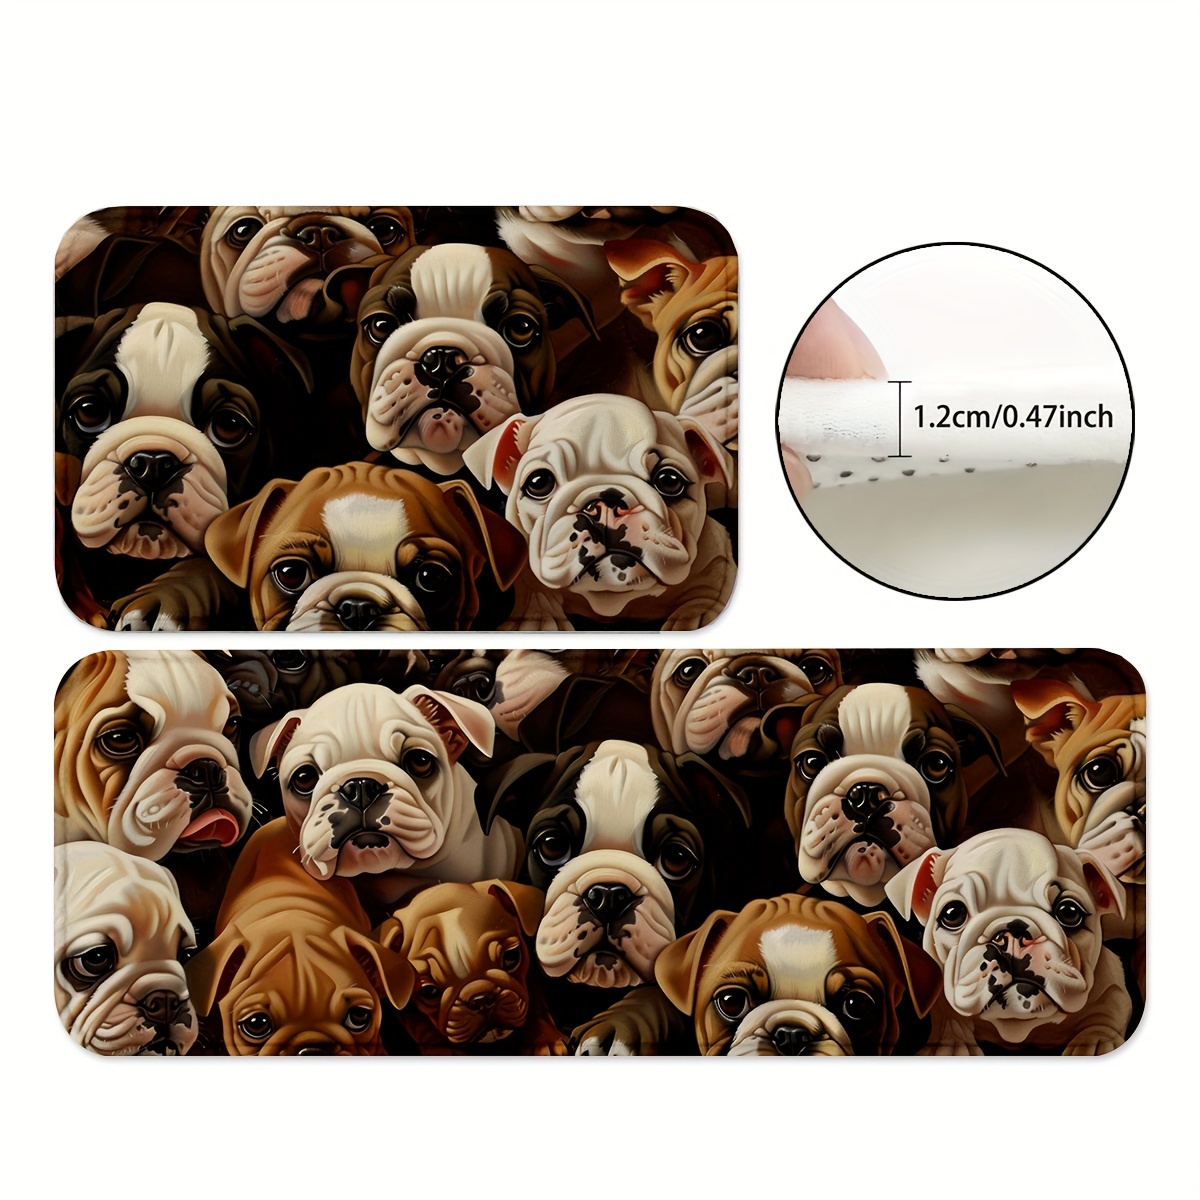 

Bulldog Kitchen Rugs Set - Non-slip, Machine Washable, Water Absorbent Polyester Mats For Dining, Bathroom, Playroom - 1.2cm Thick Cartoon Dog Design Carpet